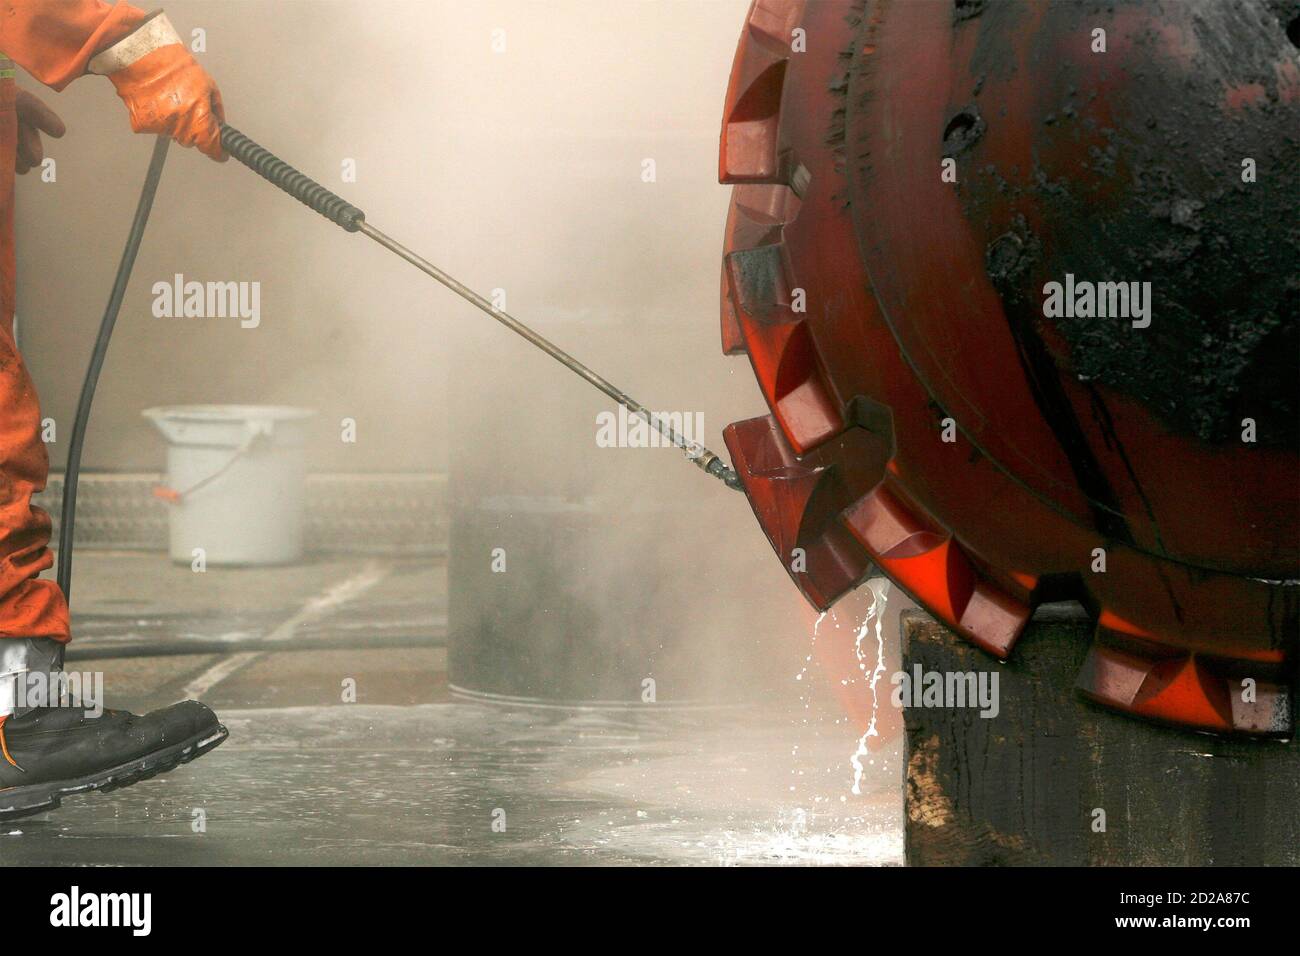 A worker uses a pressure hose to clean a paraffin cleaning 'pig' at the Trans-Alaska Pipeline Marine Terminal in Valdez, Alaska on August, 8 2008. Paraffin 'pigs' are inserted to scrape the walls of the 48-inch diameter pipeline to clean the waxy buildup that occurs when oil cools as it flows from the oil fields in Prudhoe Bay.  REUTERS/Lucas Jackson  (UNITED STATES) Stock Photo